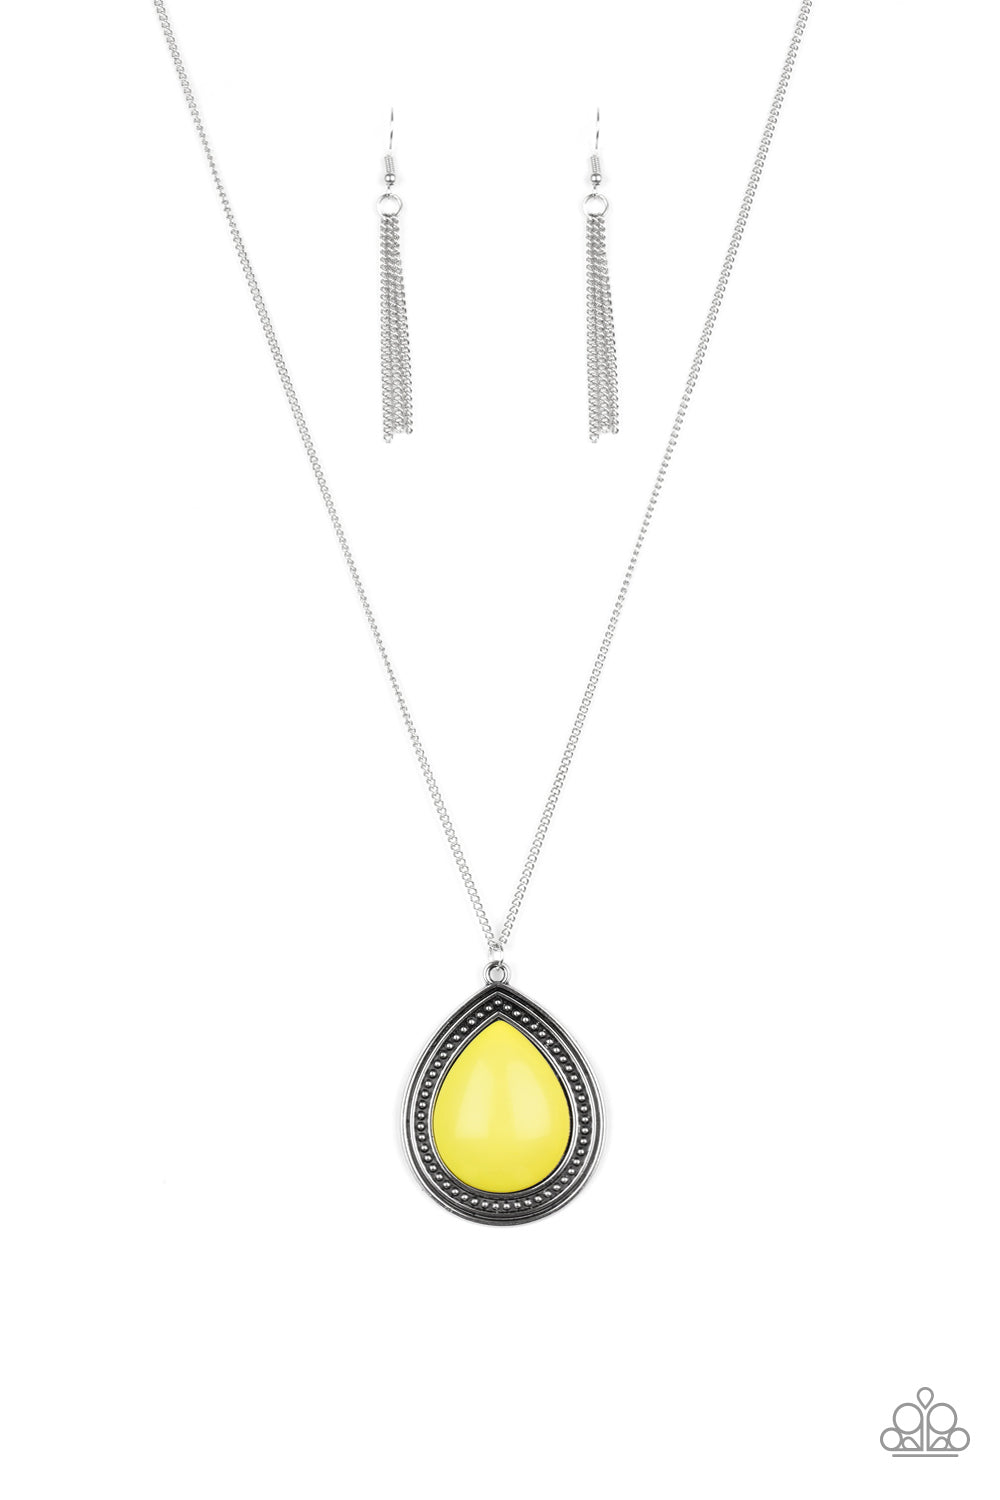 Chroma Courage Paparazzi Accessories Necklace with Earrings